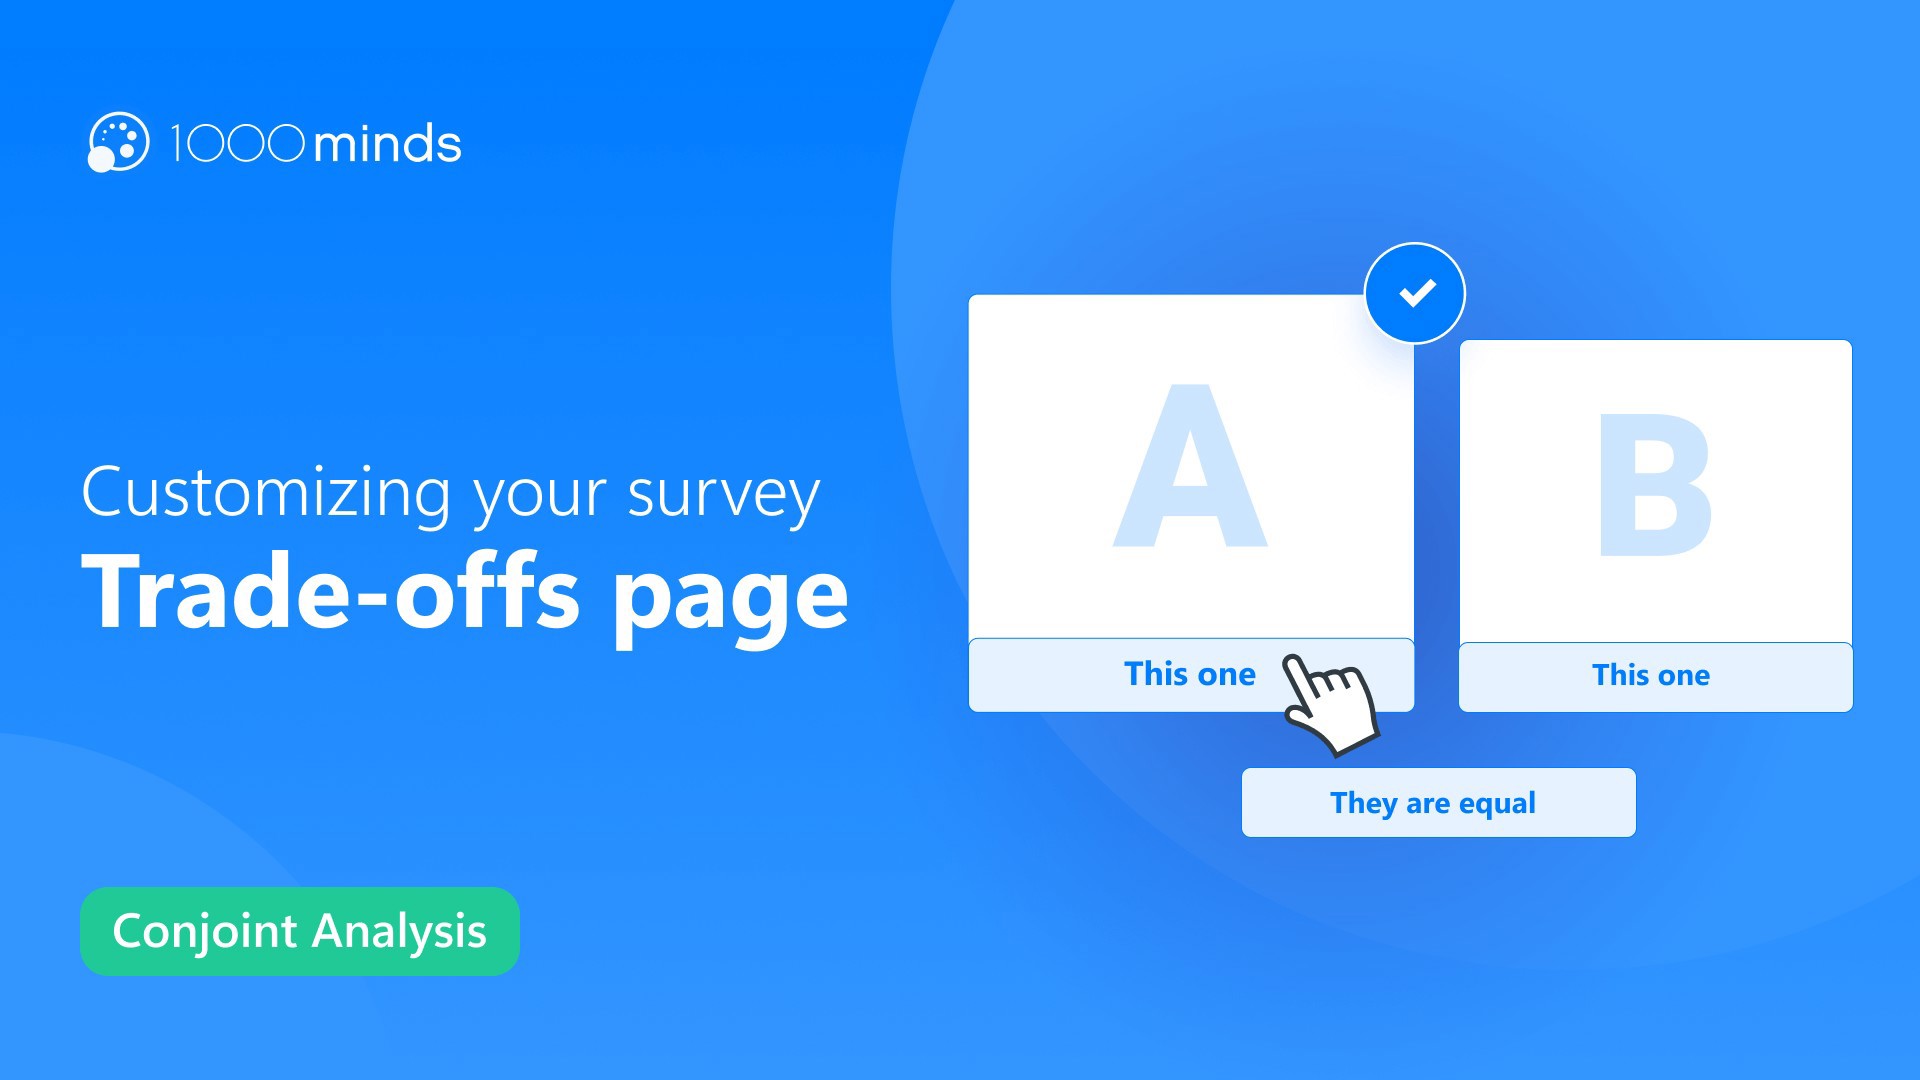 Customizing your survey: the Trade-offs page